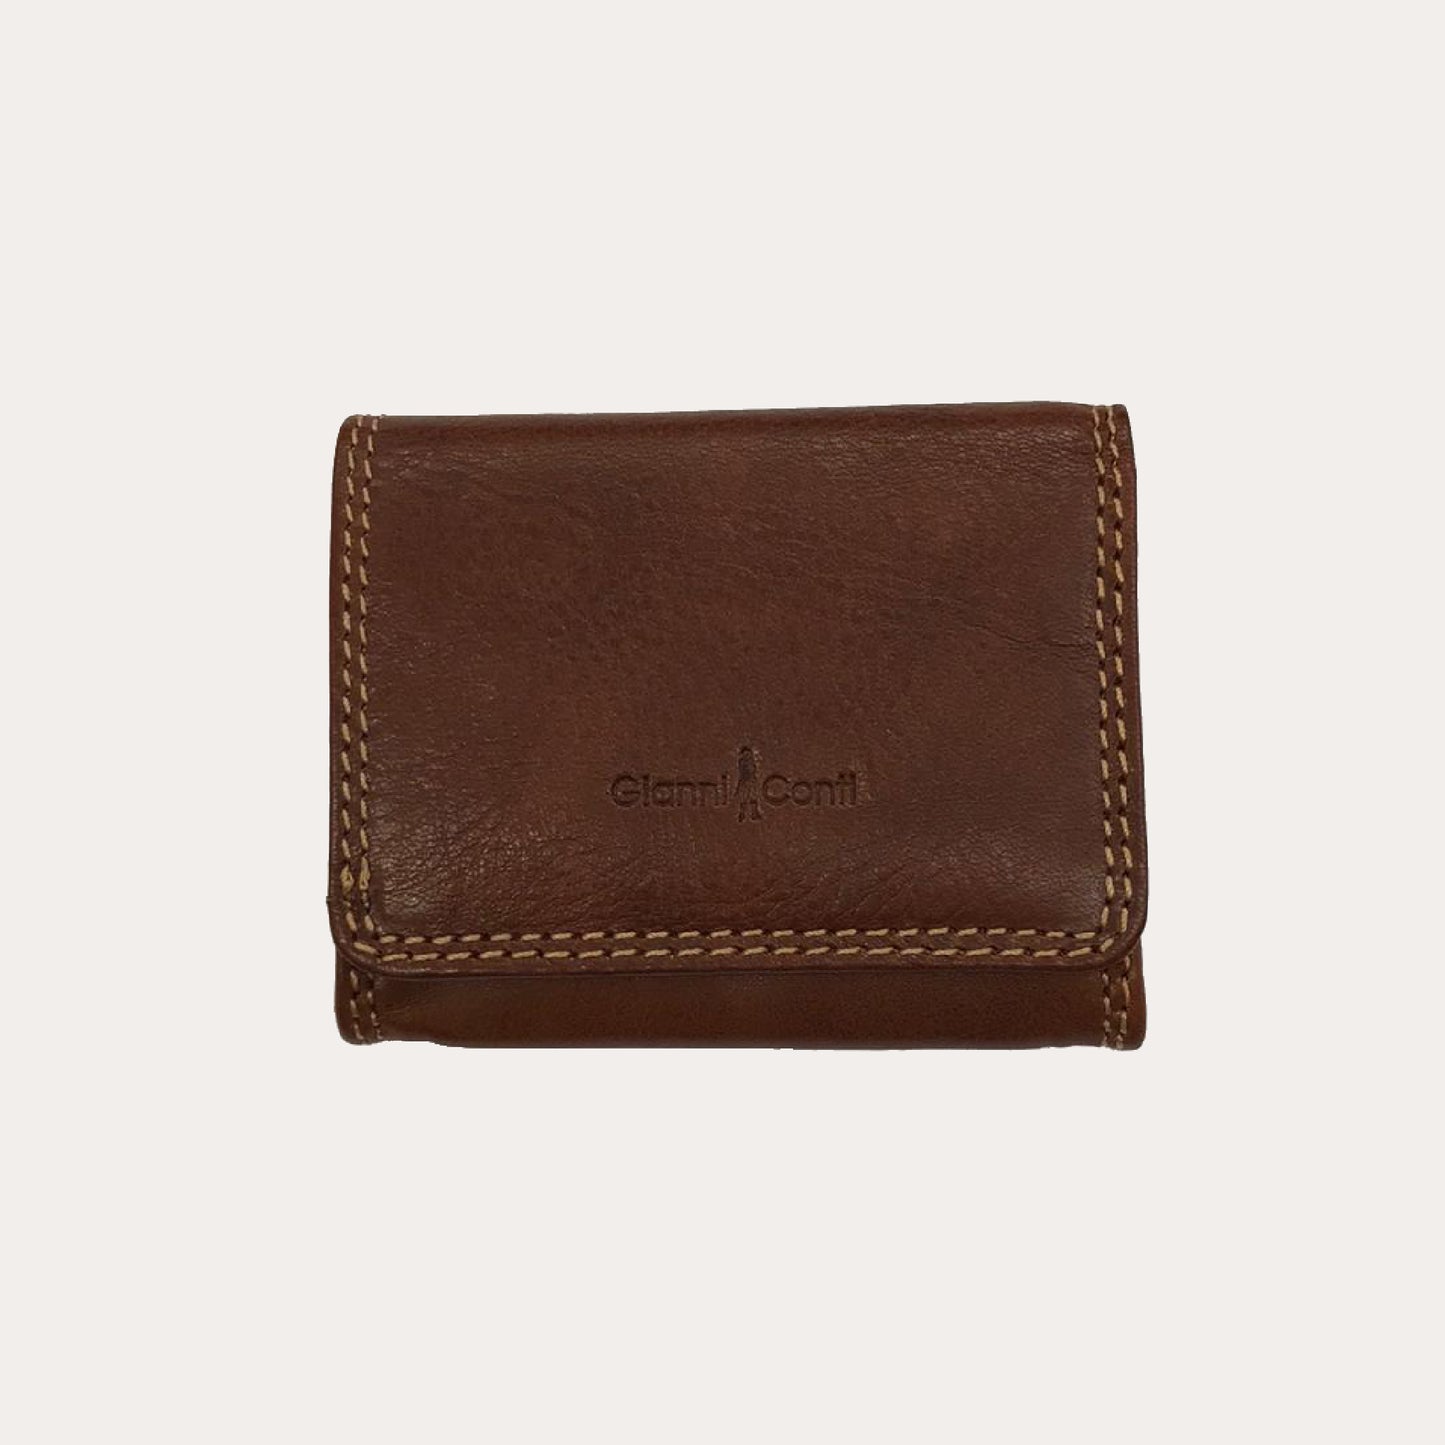 Gianni Conti Tan Leather Wallet-2 Credit Card/Coin Section